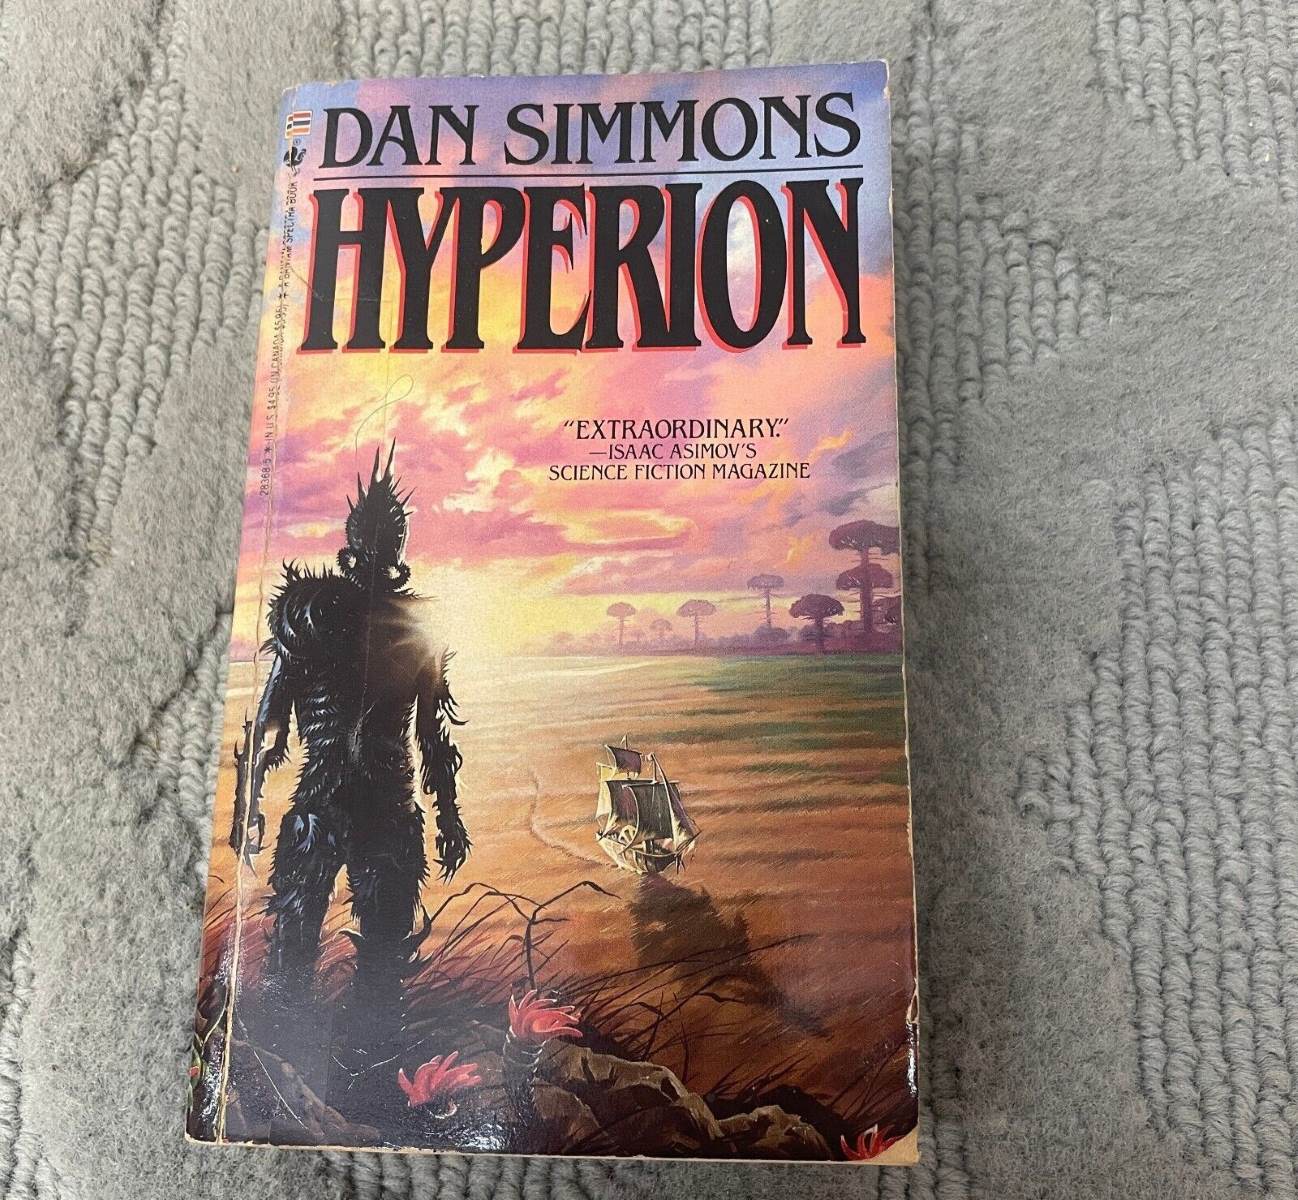 11-extraordinary-facts-about-hyperion-dan-simmons